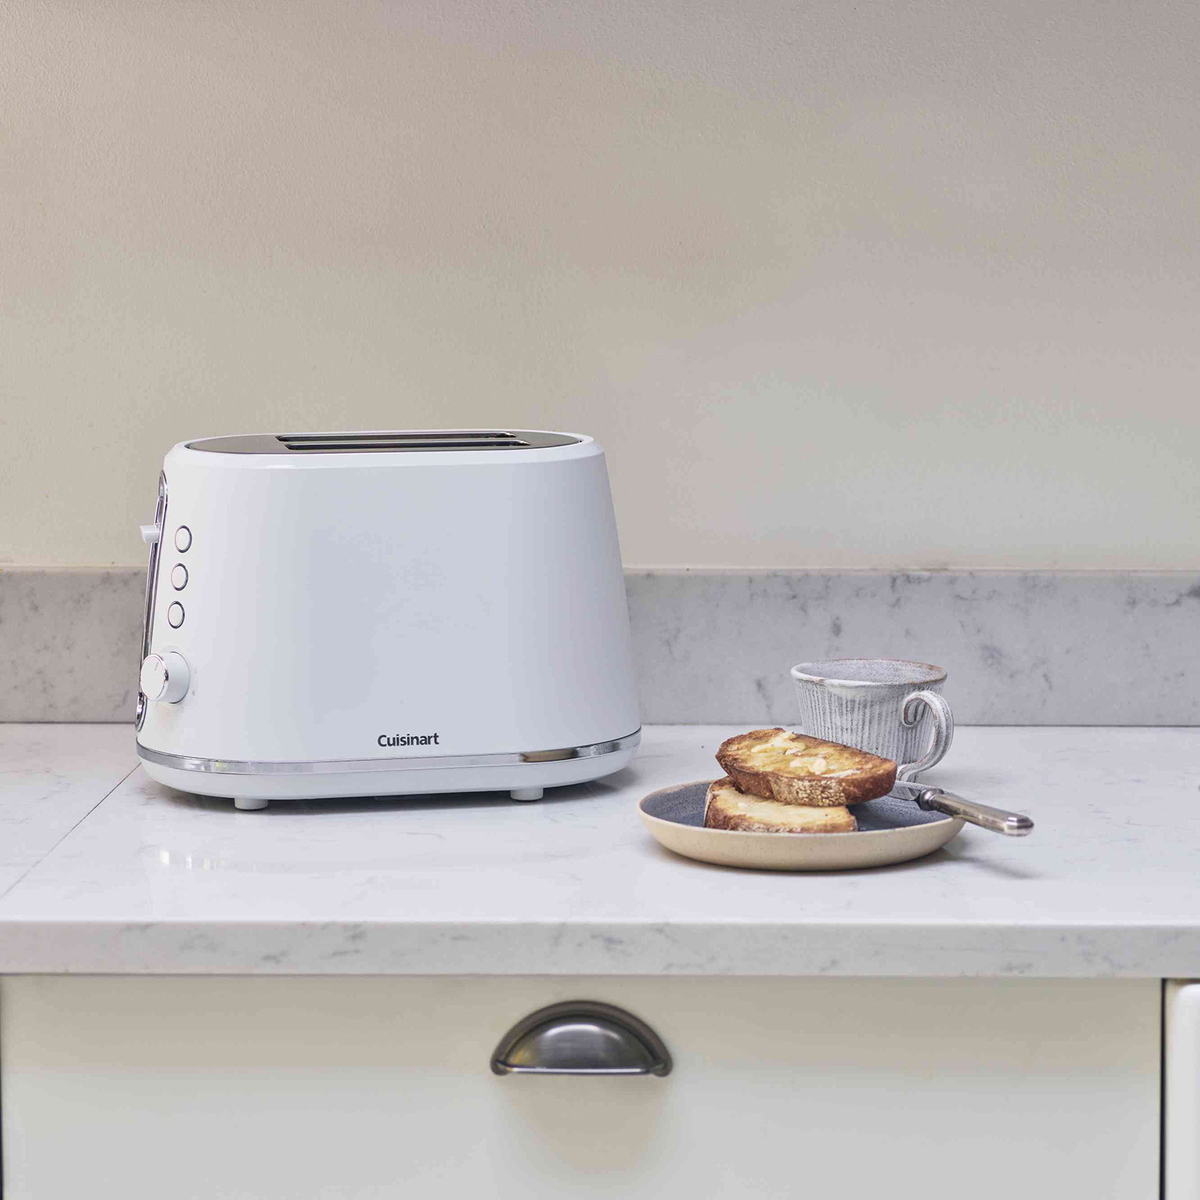 Cuisinart CPT780WU2 2 Slot Toaster, Pebble